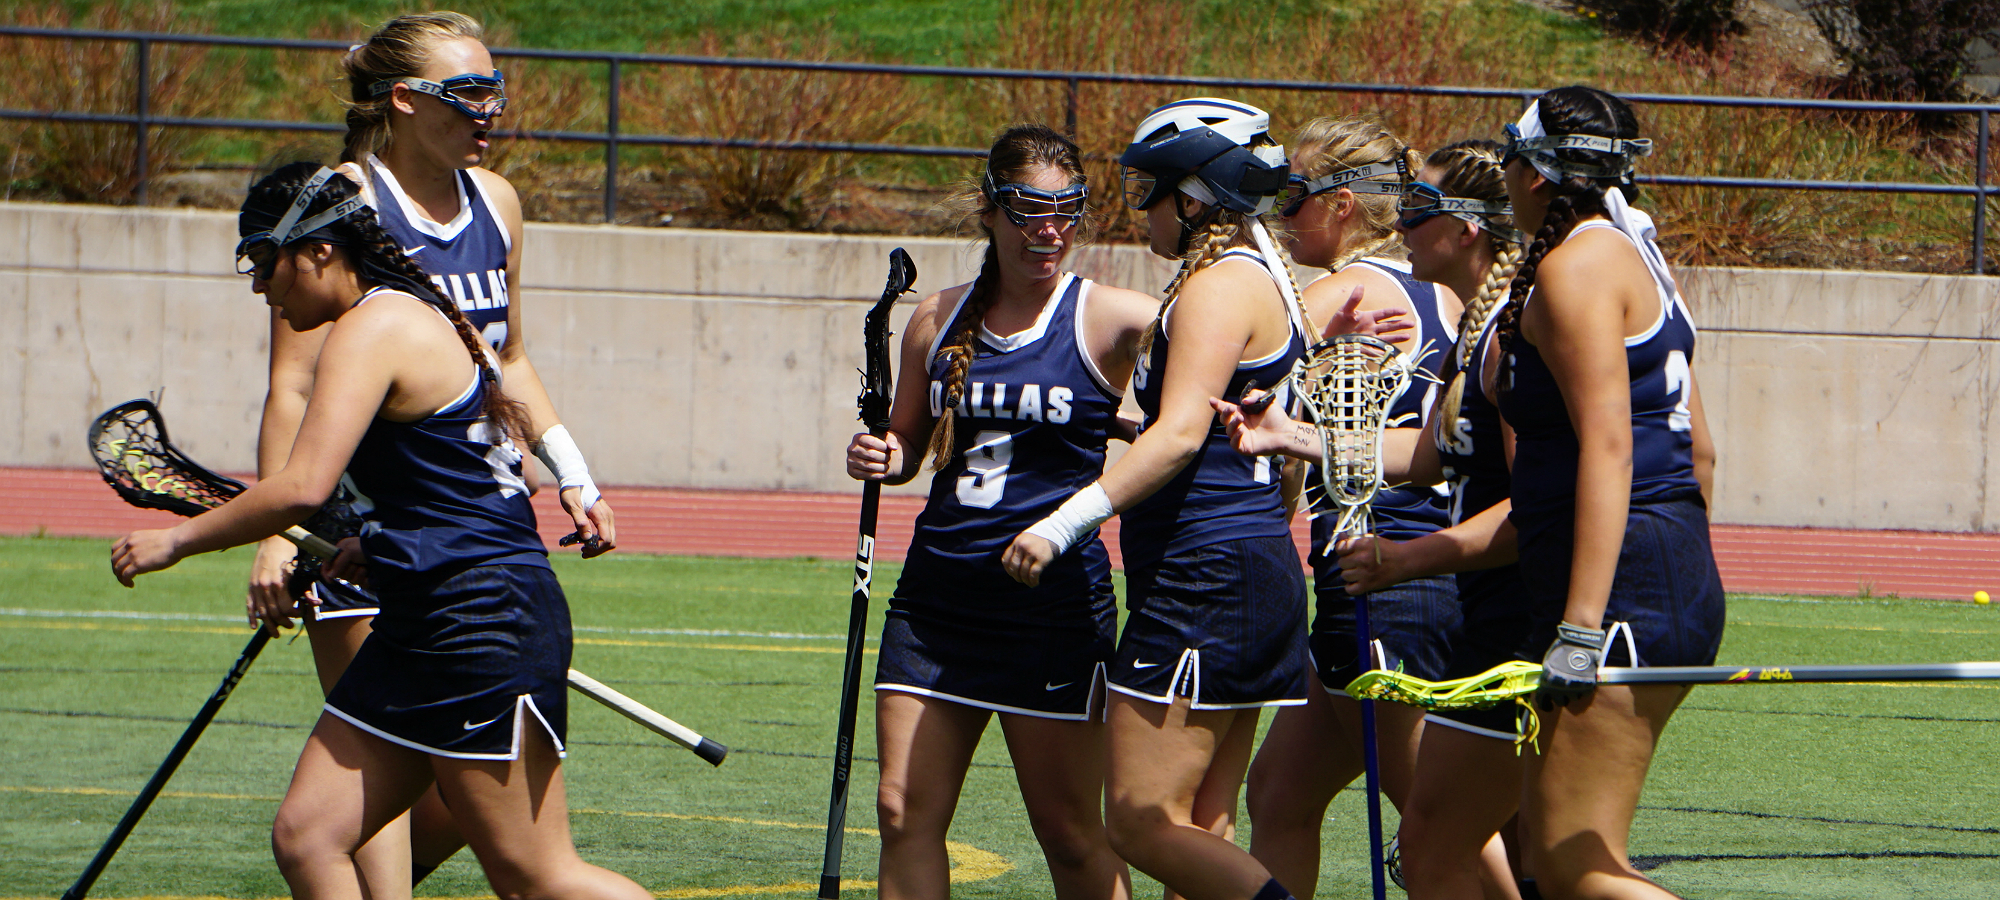 Crusaders fall to Southwestern in 2019 SCAC Women's Lacrosse Tournament